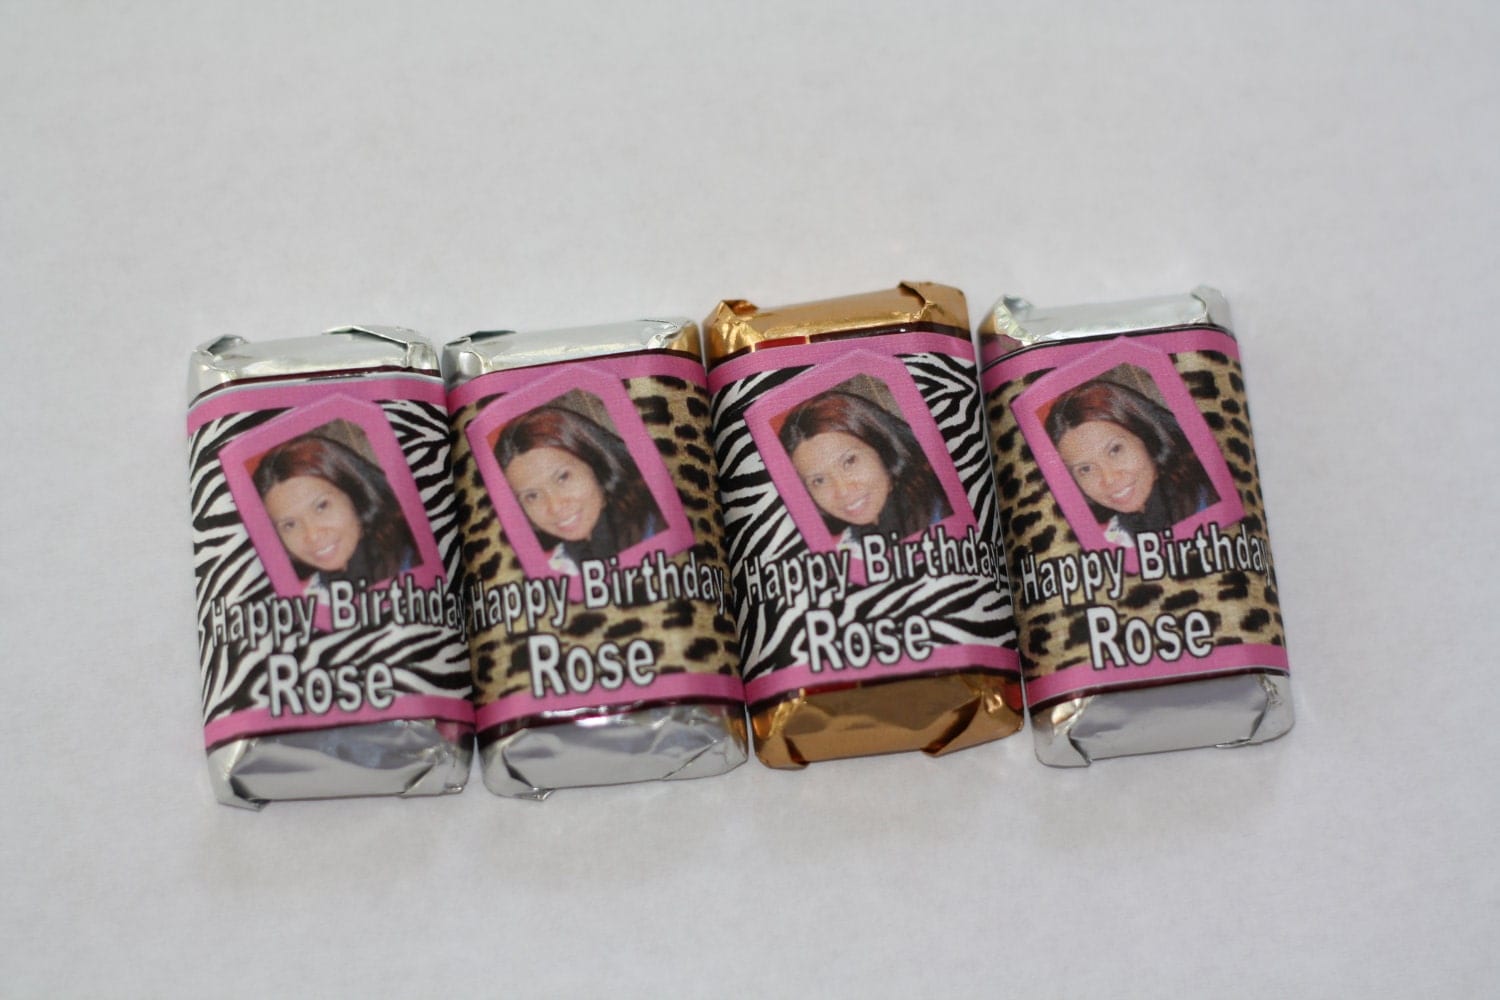 Hershey Candy Bar Wrappers Personalized